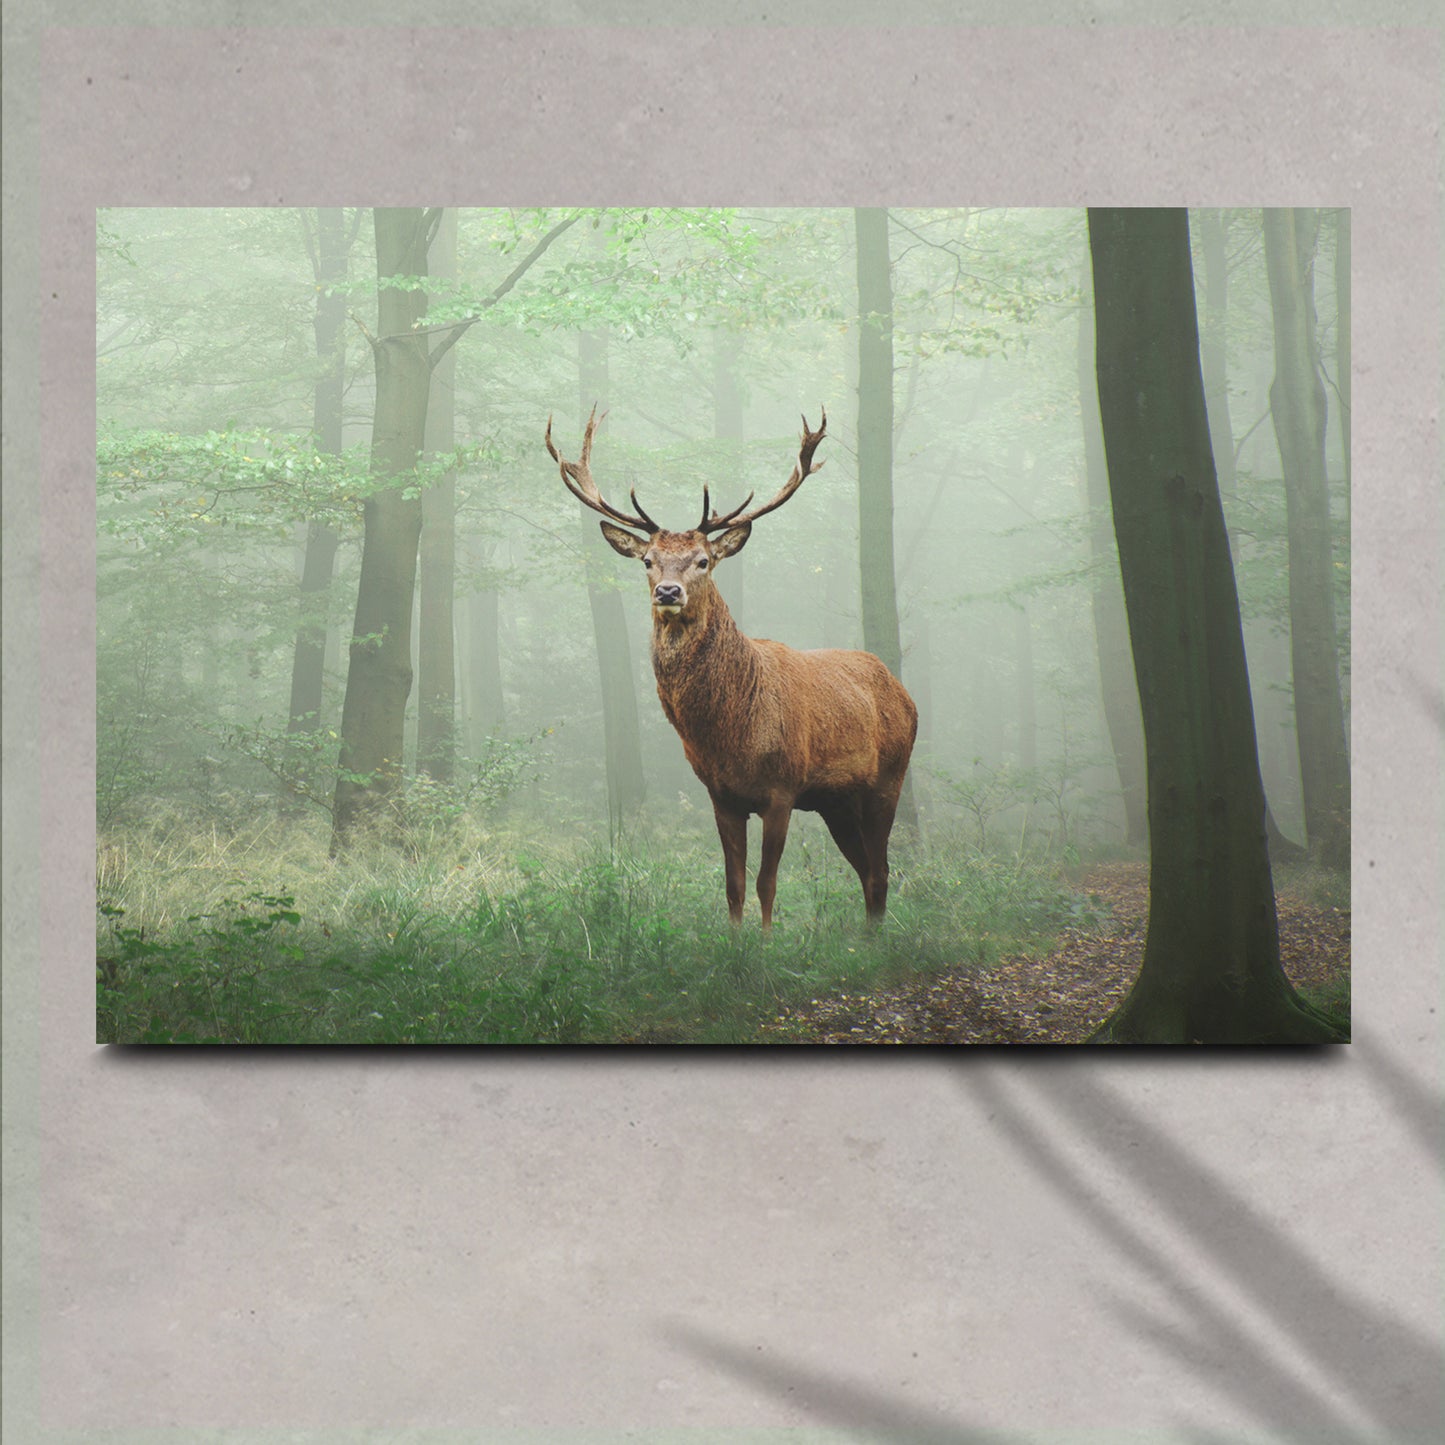 Deer In Foggy Forest Canvas Wall Art II - Image by Tailored Canvases